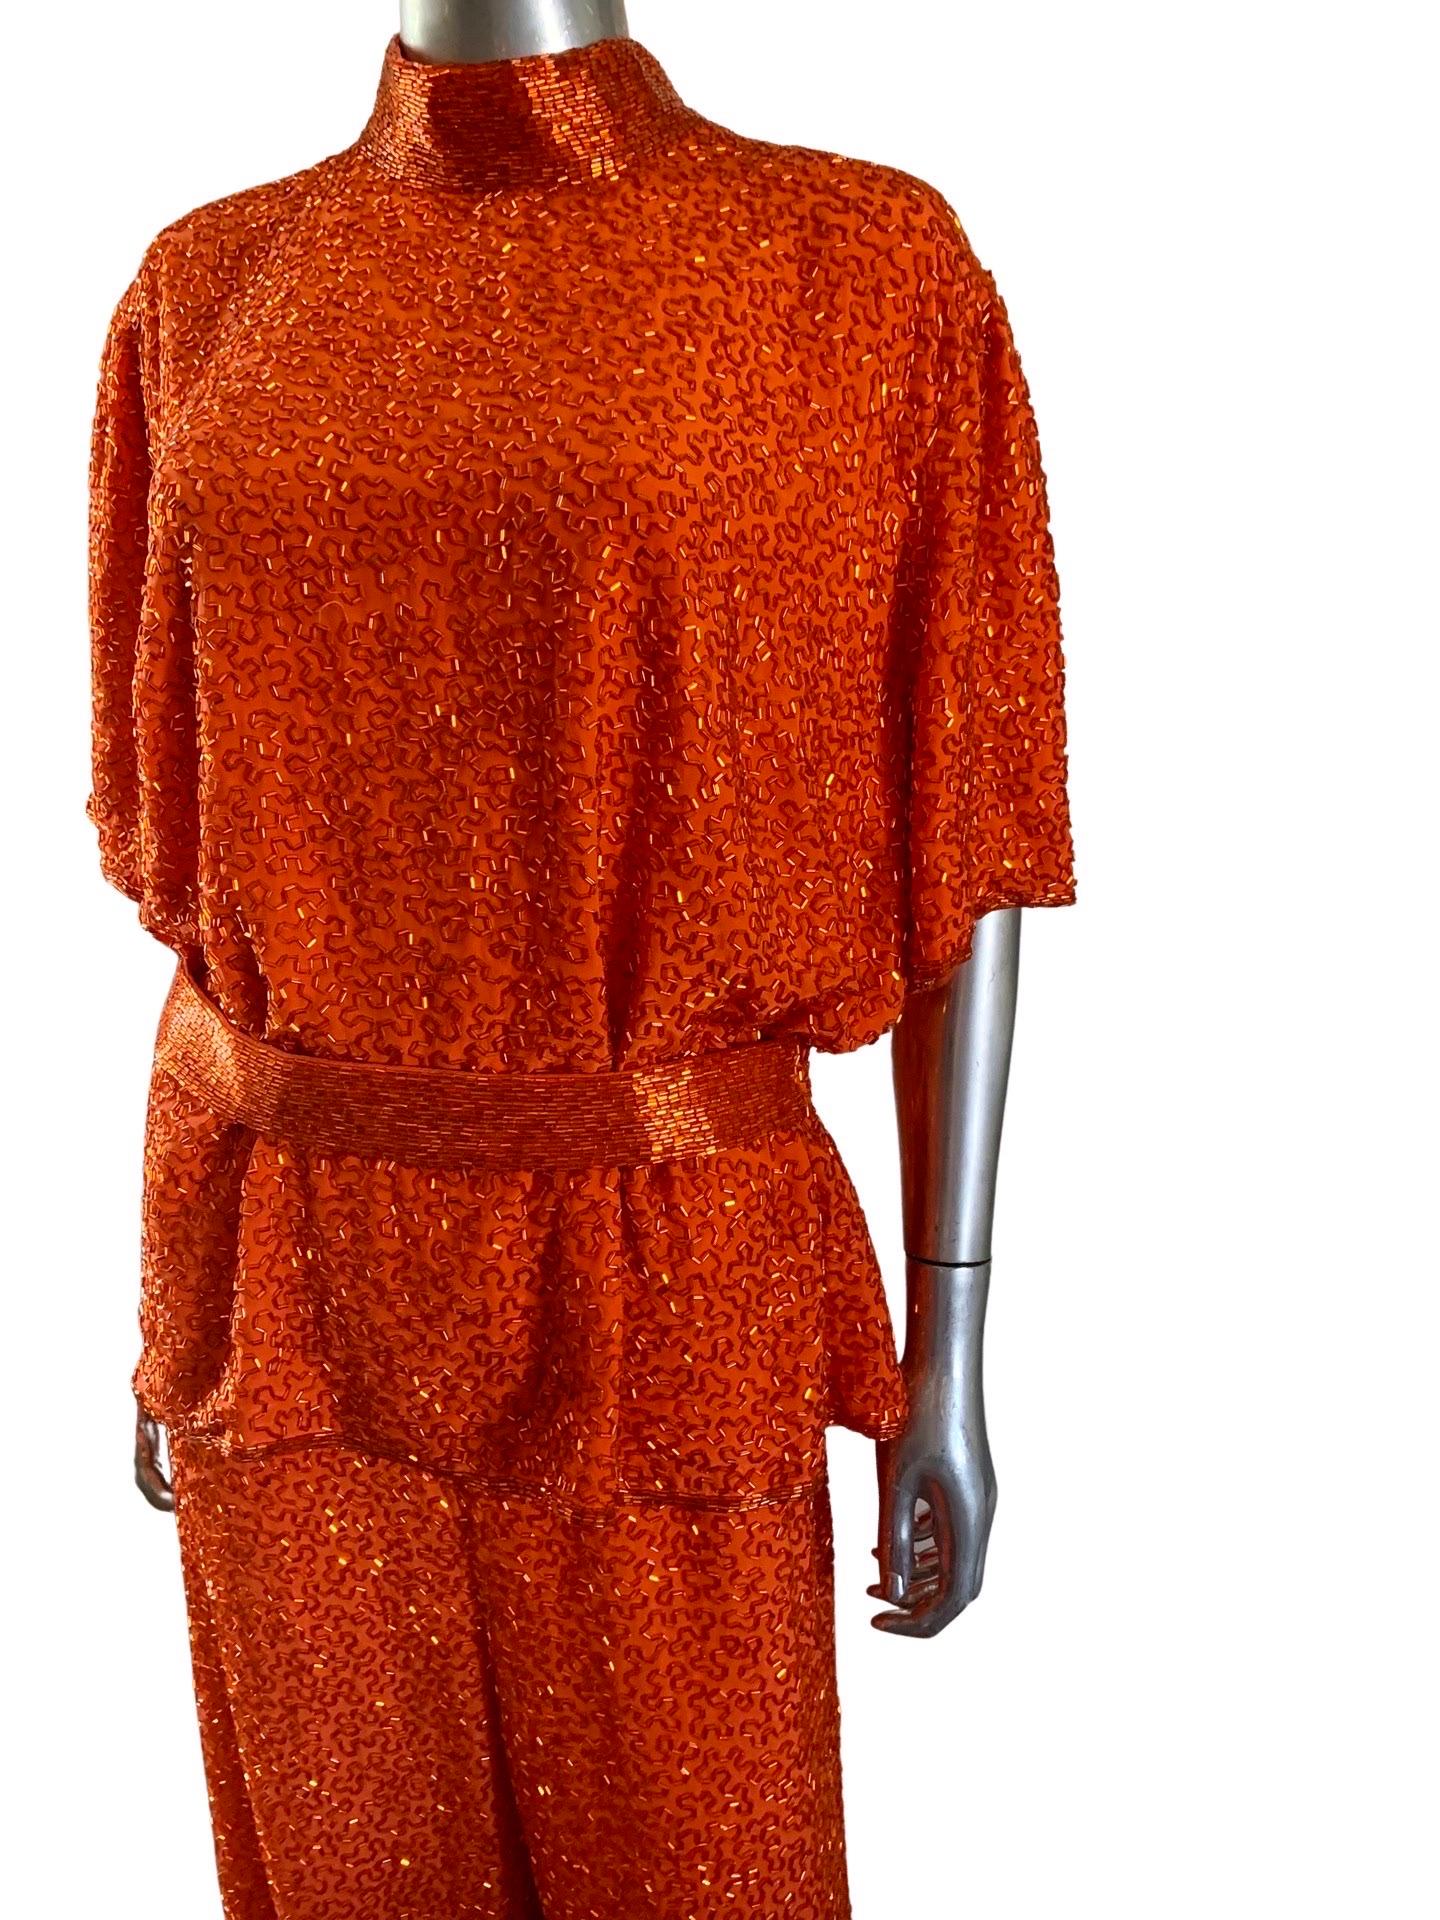 Stephen Yearick Custom Made Orange Silk Bugle Bead Tunic & Pant Set Plus Size  In Good Condition For Sale In Palm Springs, CA